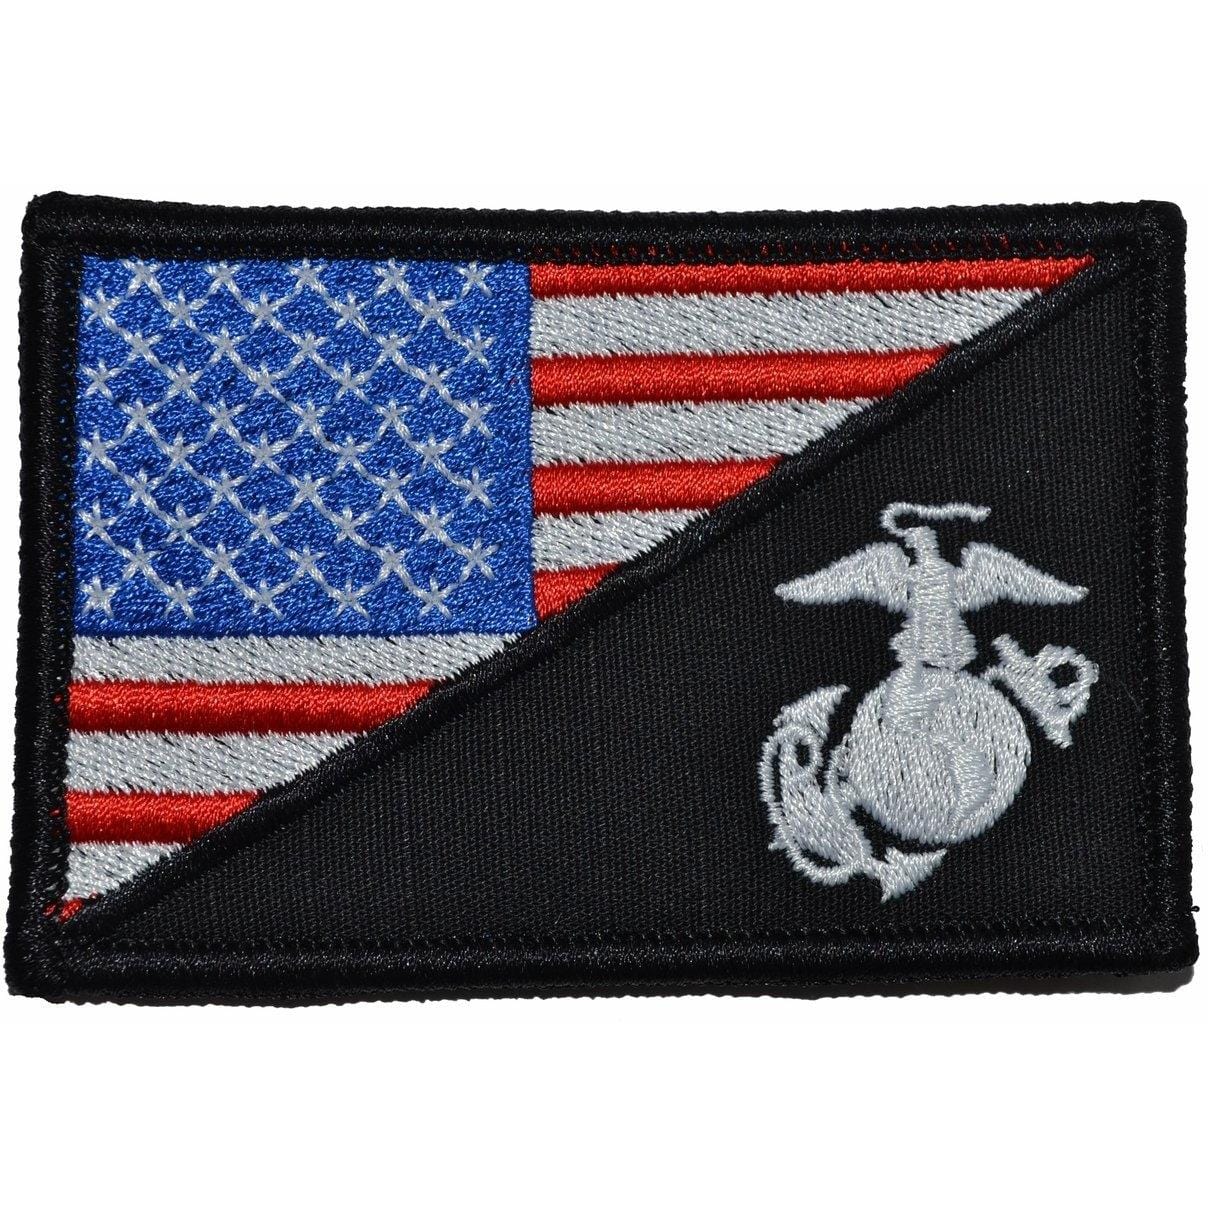 Tactical Gear Junkie Patches Full Color USMC EGA USA Flag - 2.25x3.5 Patch